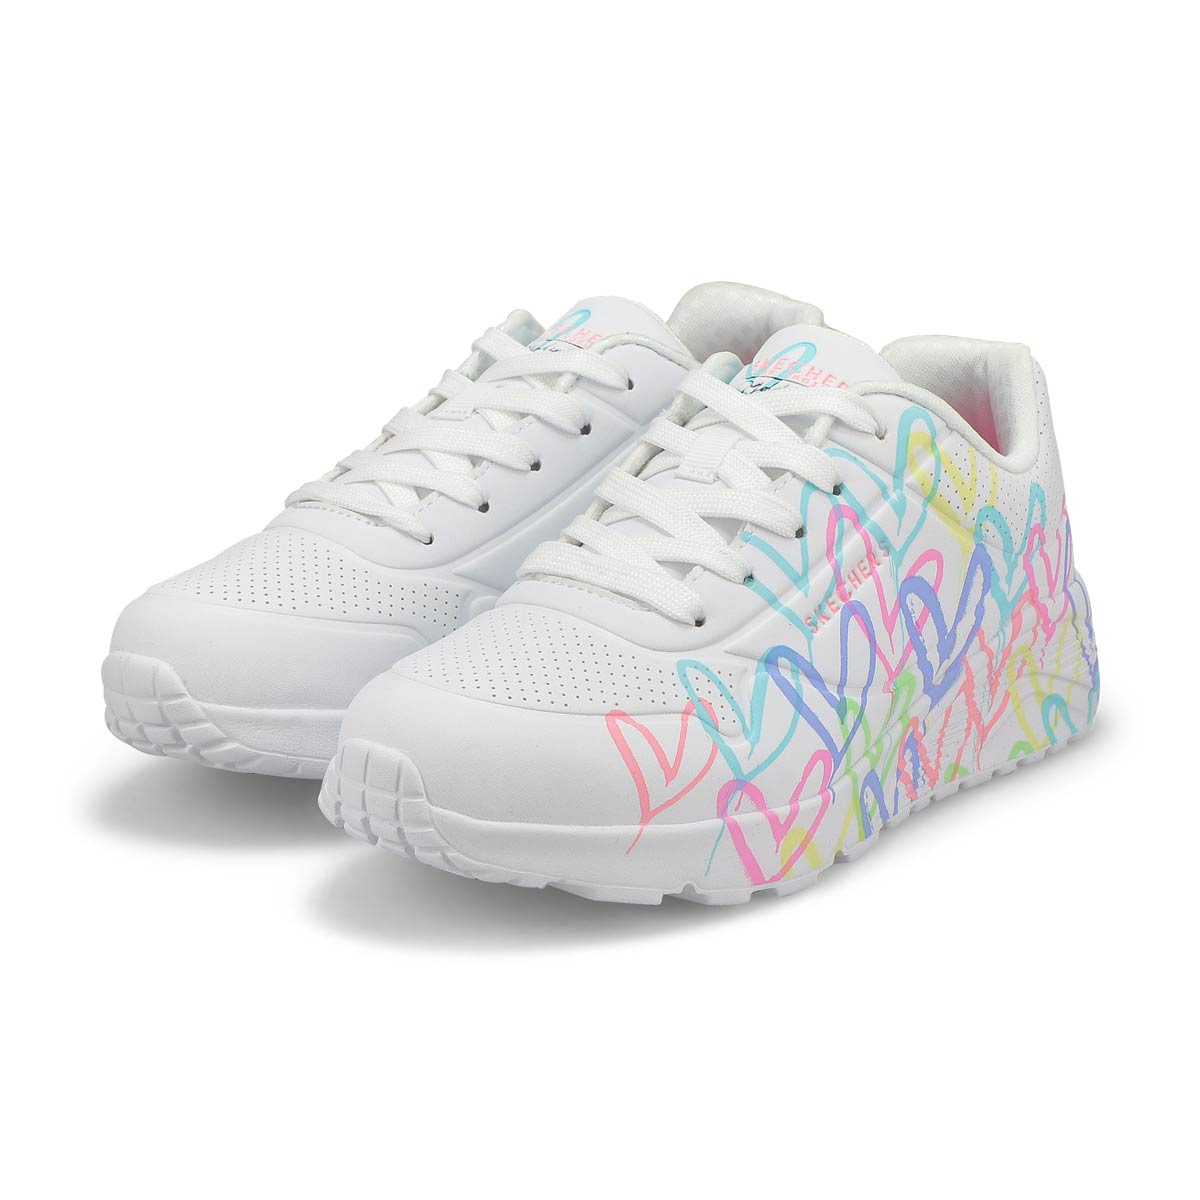 Girls'  JGoldcrown Uno Lite Lace Up Sneaker - White/Pink/Turquoise